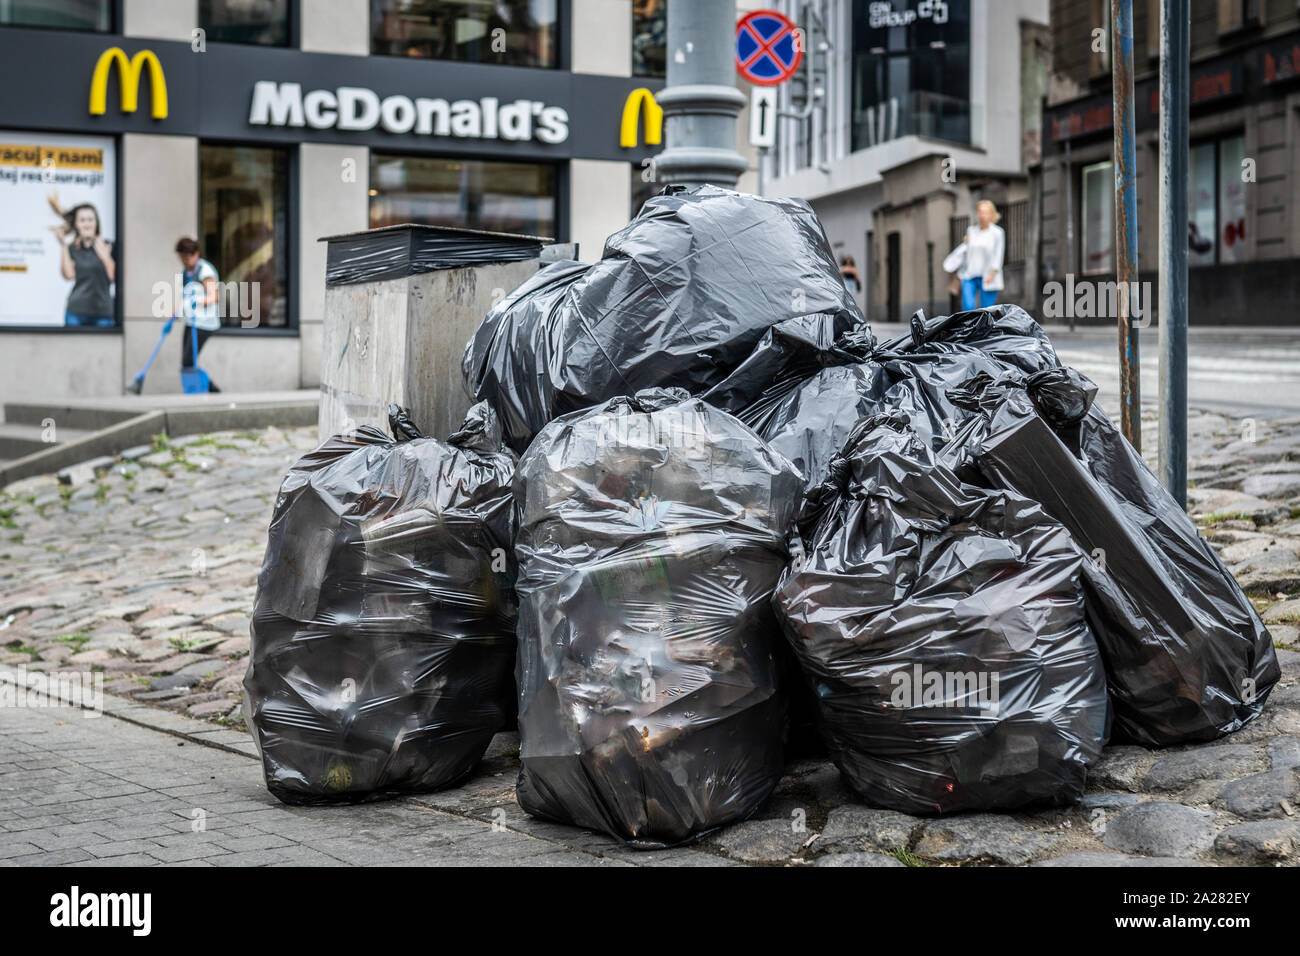 https://c8.alamy.com/comp/2A282EY/pile-of-plastic-bags-full-of-garbage-in-front-of-a-fast-food-restaurant-2A282EY.jpg